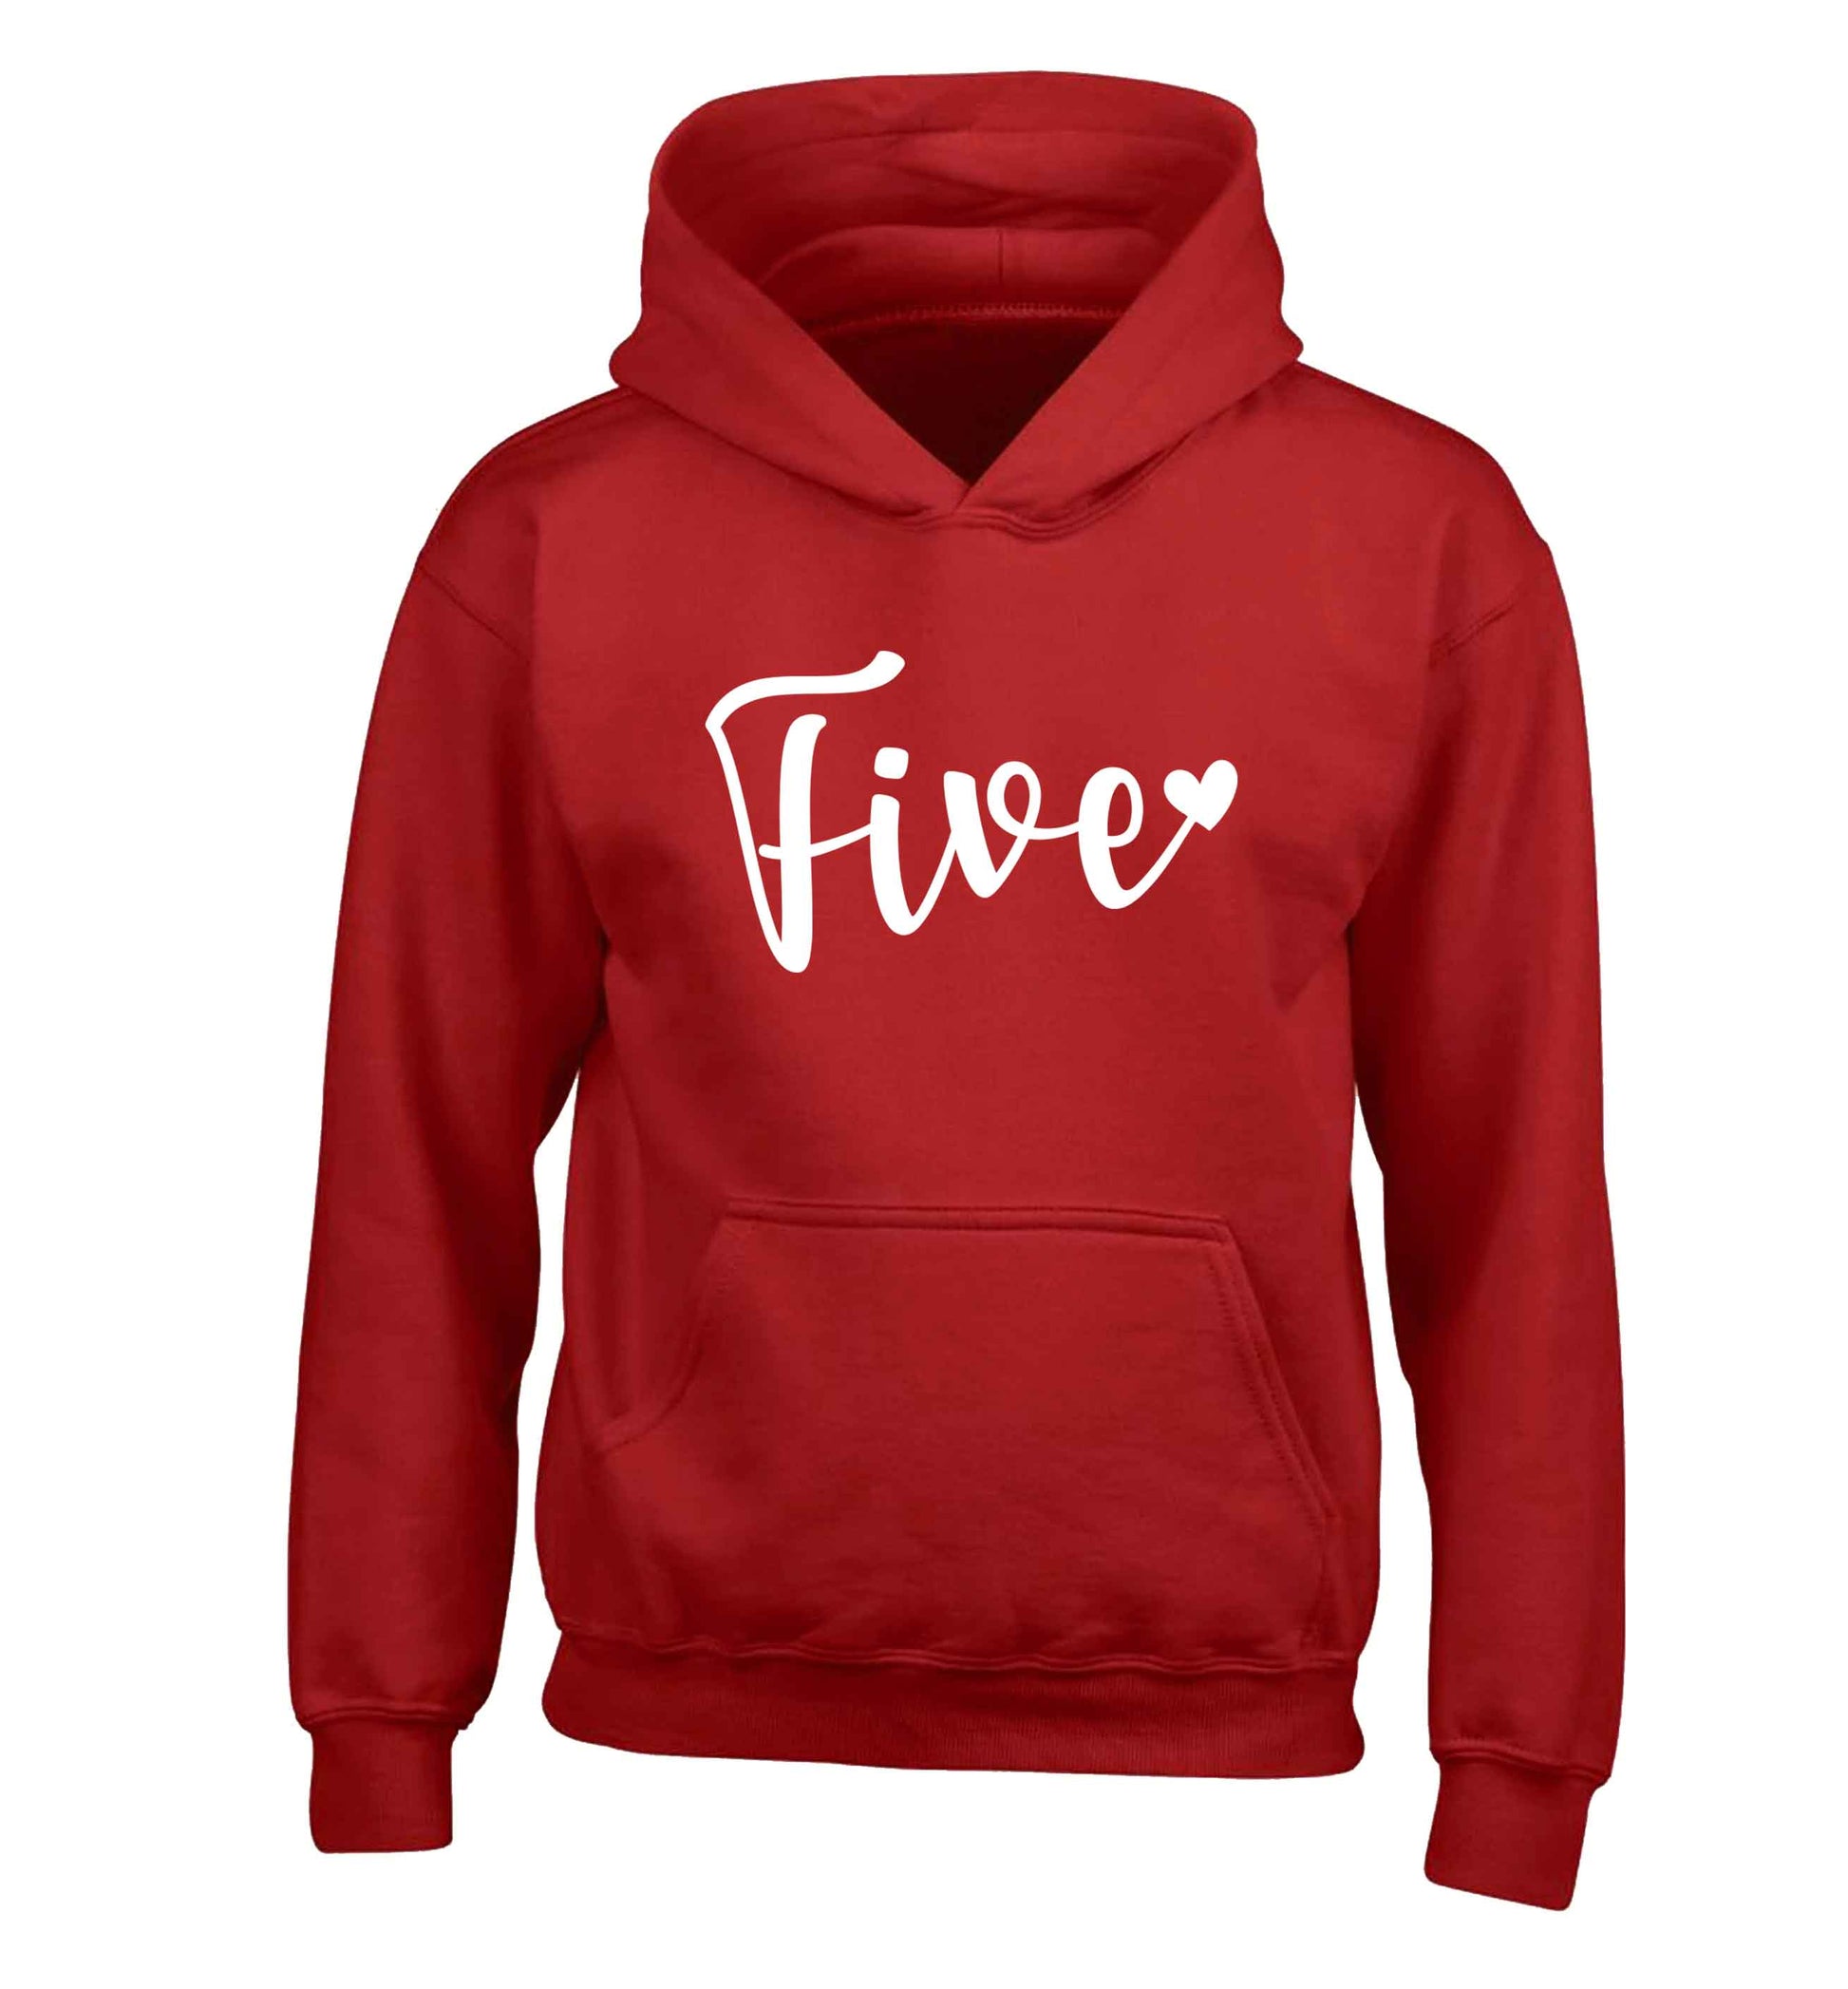 Five and heart children's red hoodie 12-13 Years